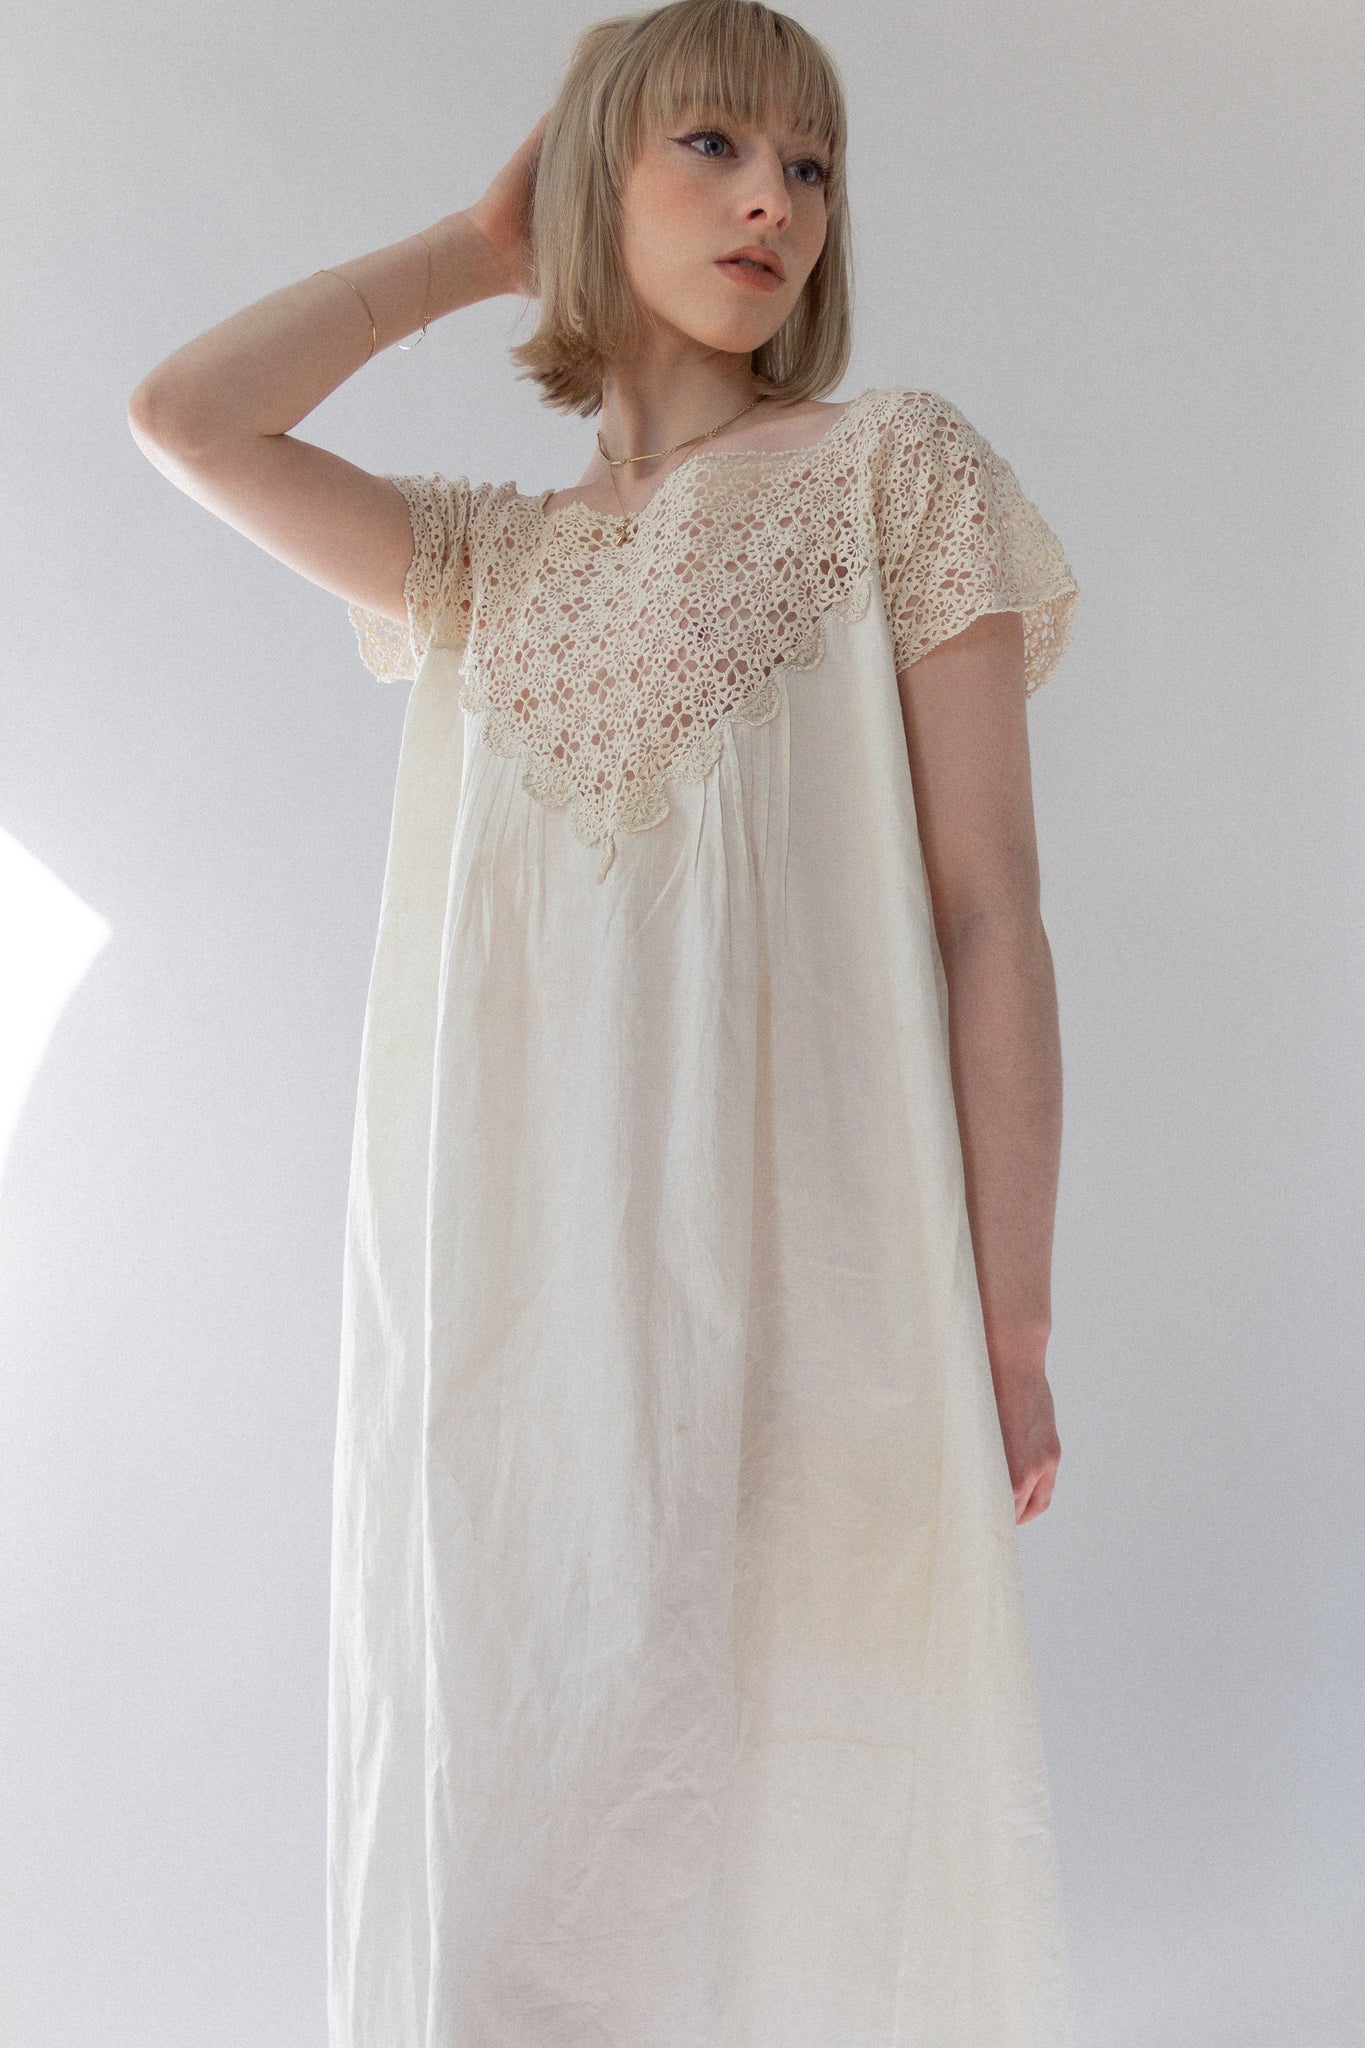 Antique 1910s Edwardian Nightgown